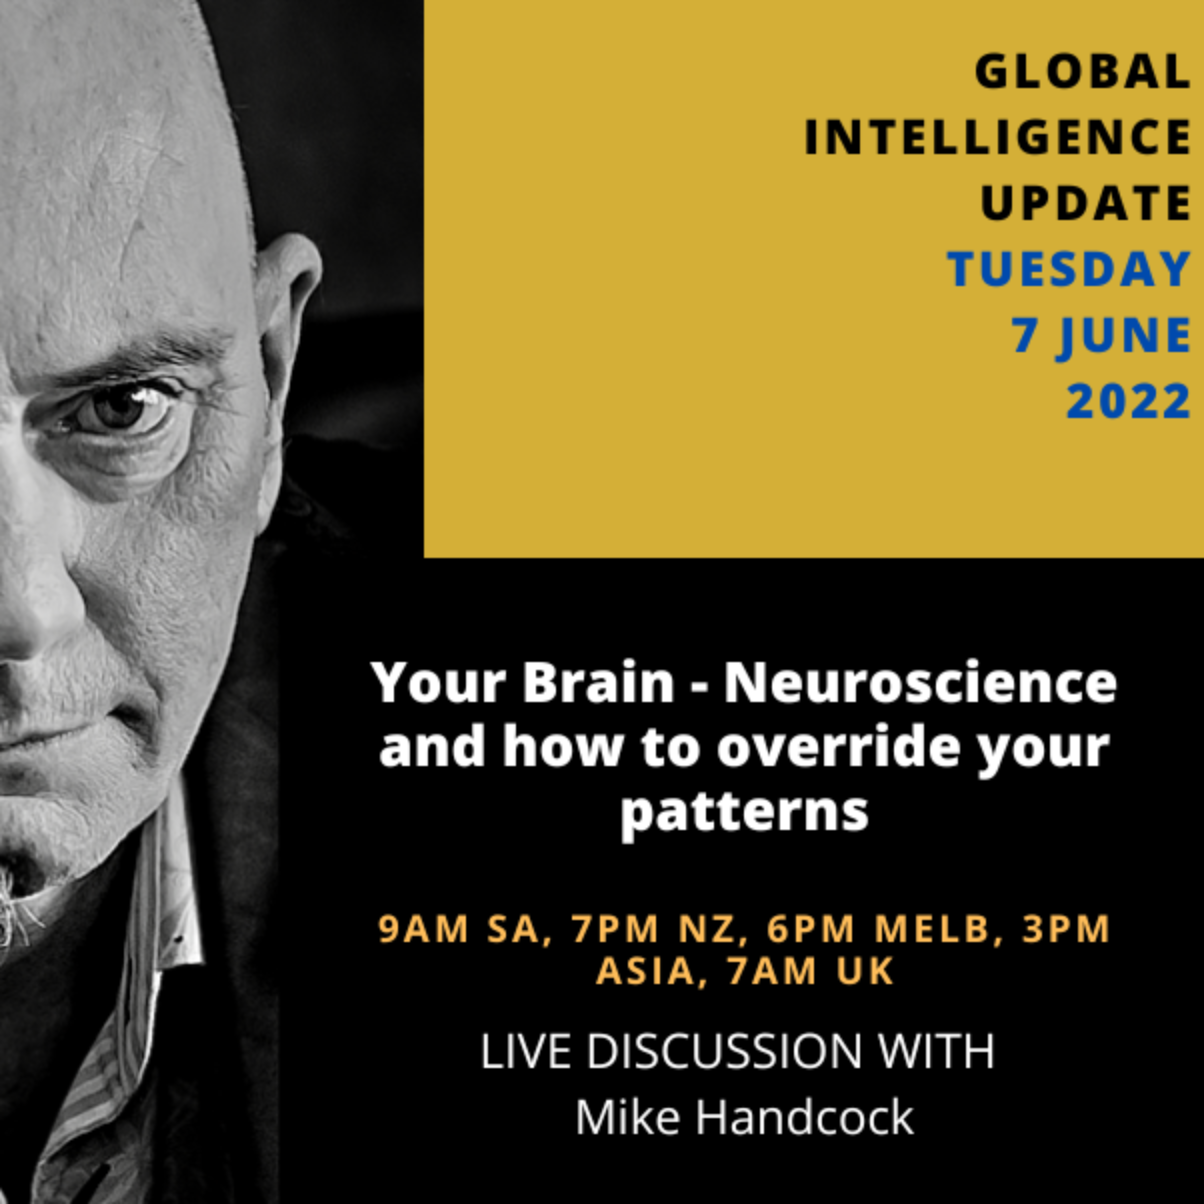 Your Brain - Neuroscience and how to override your patterns with Mike Handcock